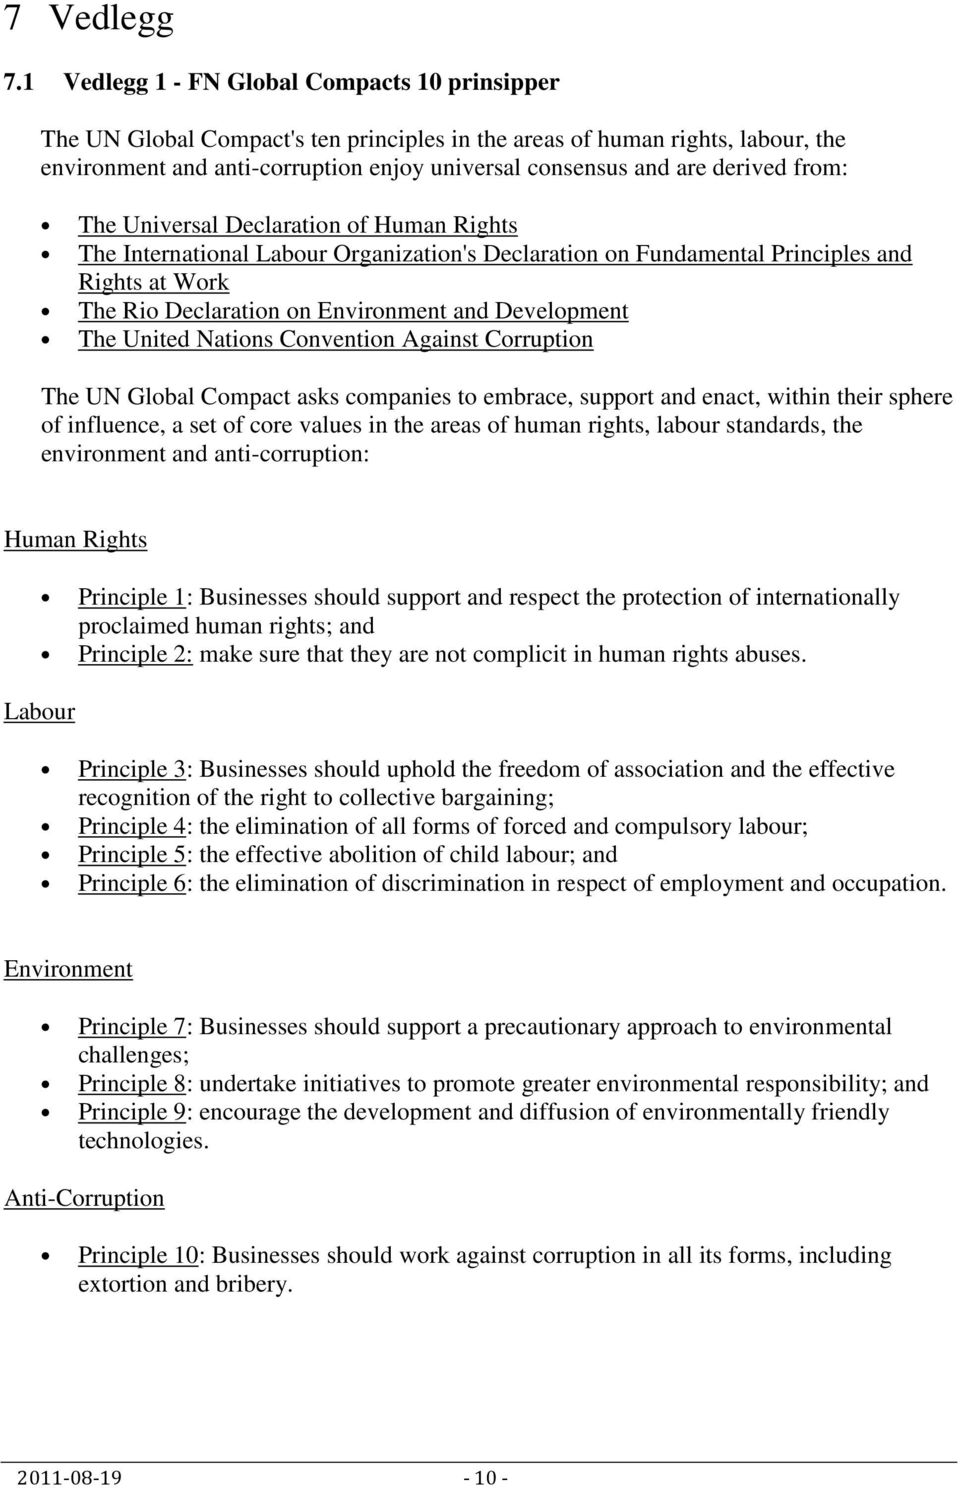 derived from: The Universal Declaration of Human Rights The International Labour Organization's Declaration on Fundamental Principles and Rights at Work The Rio Declaration on Environment and